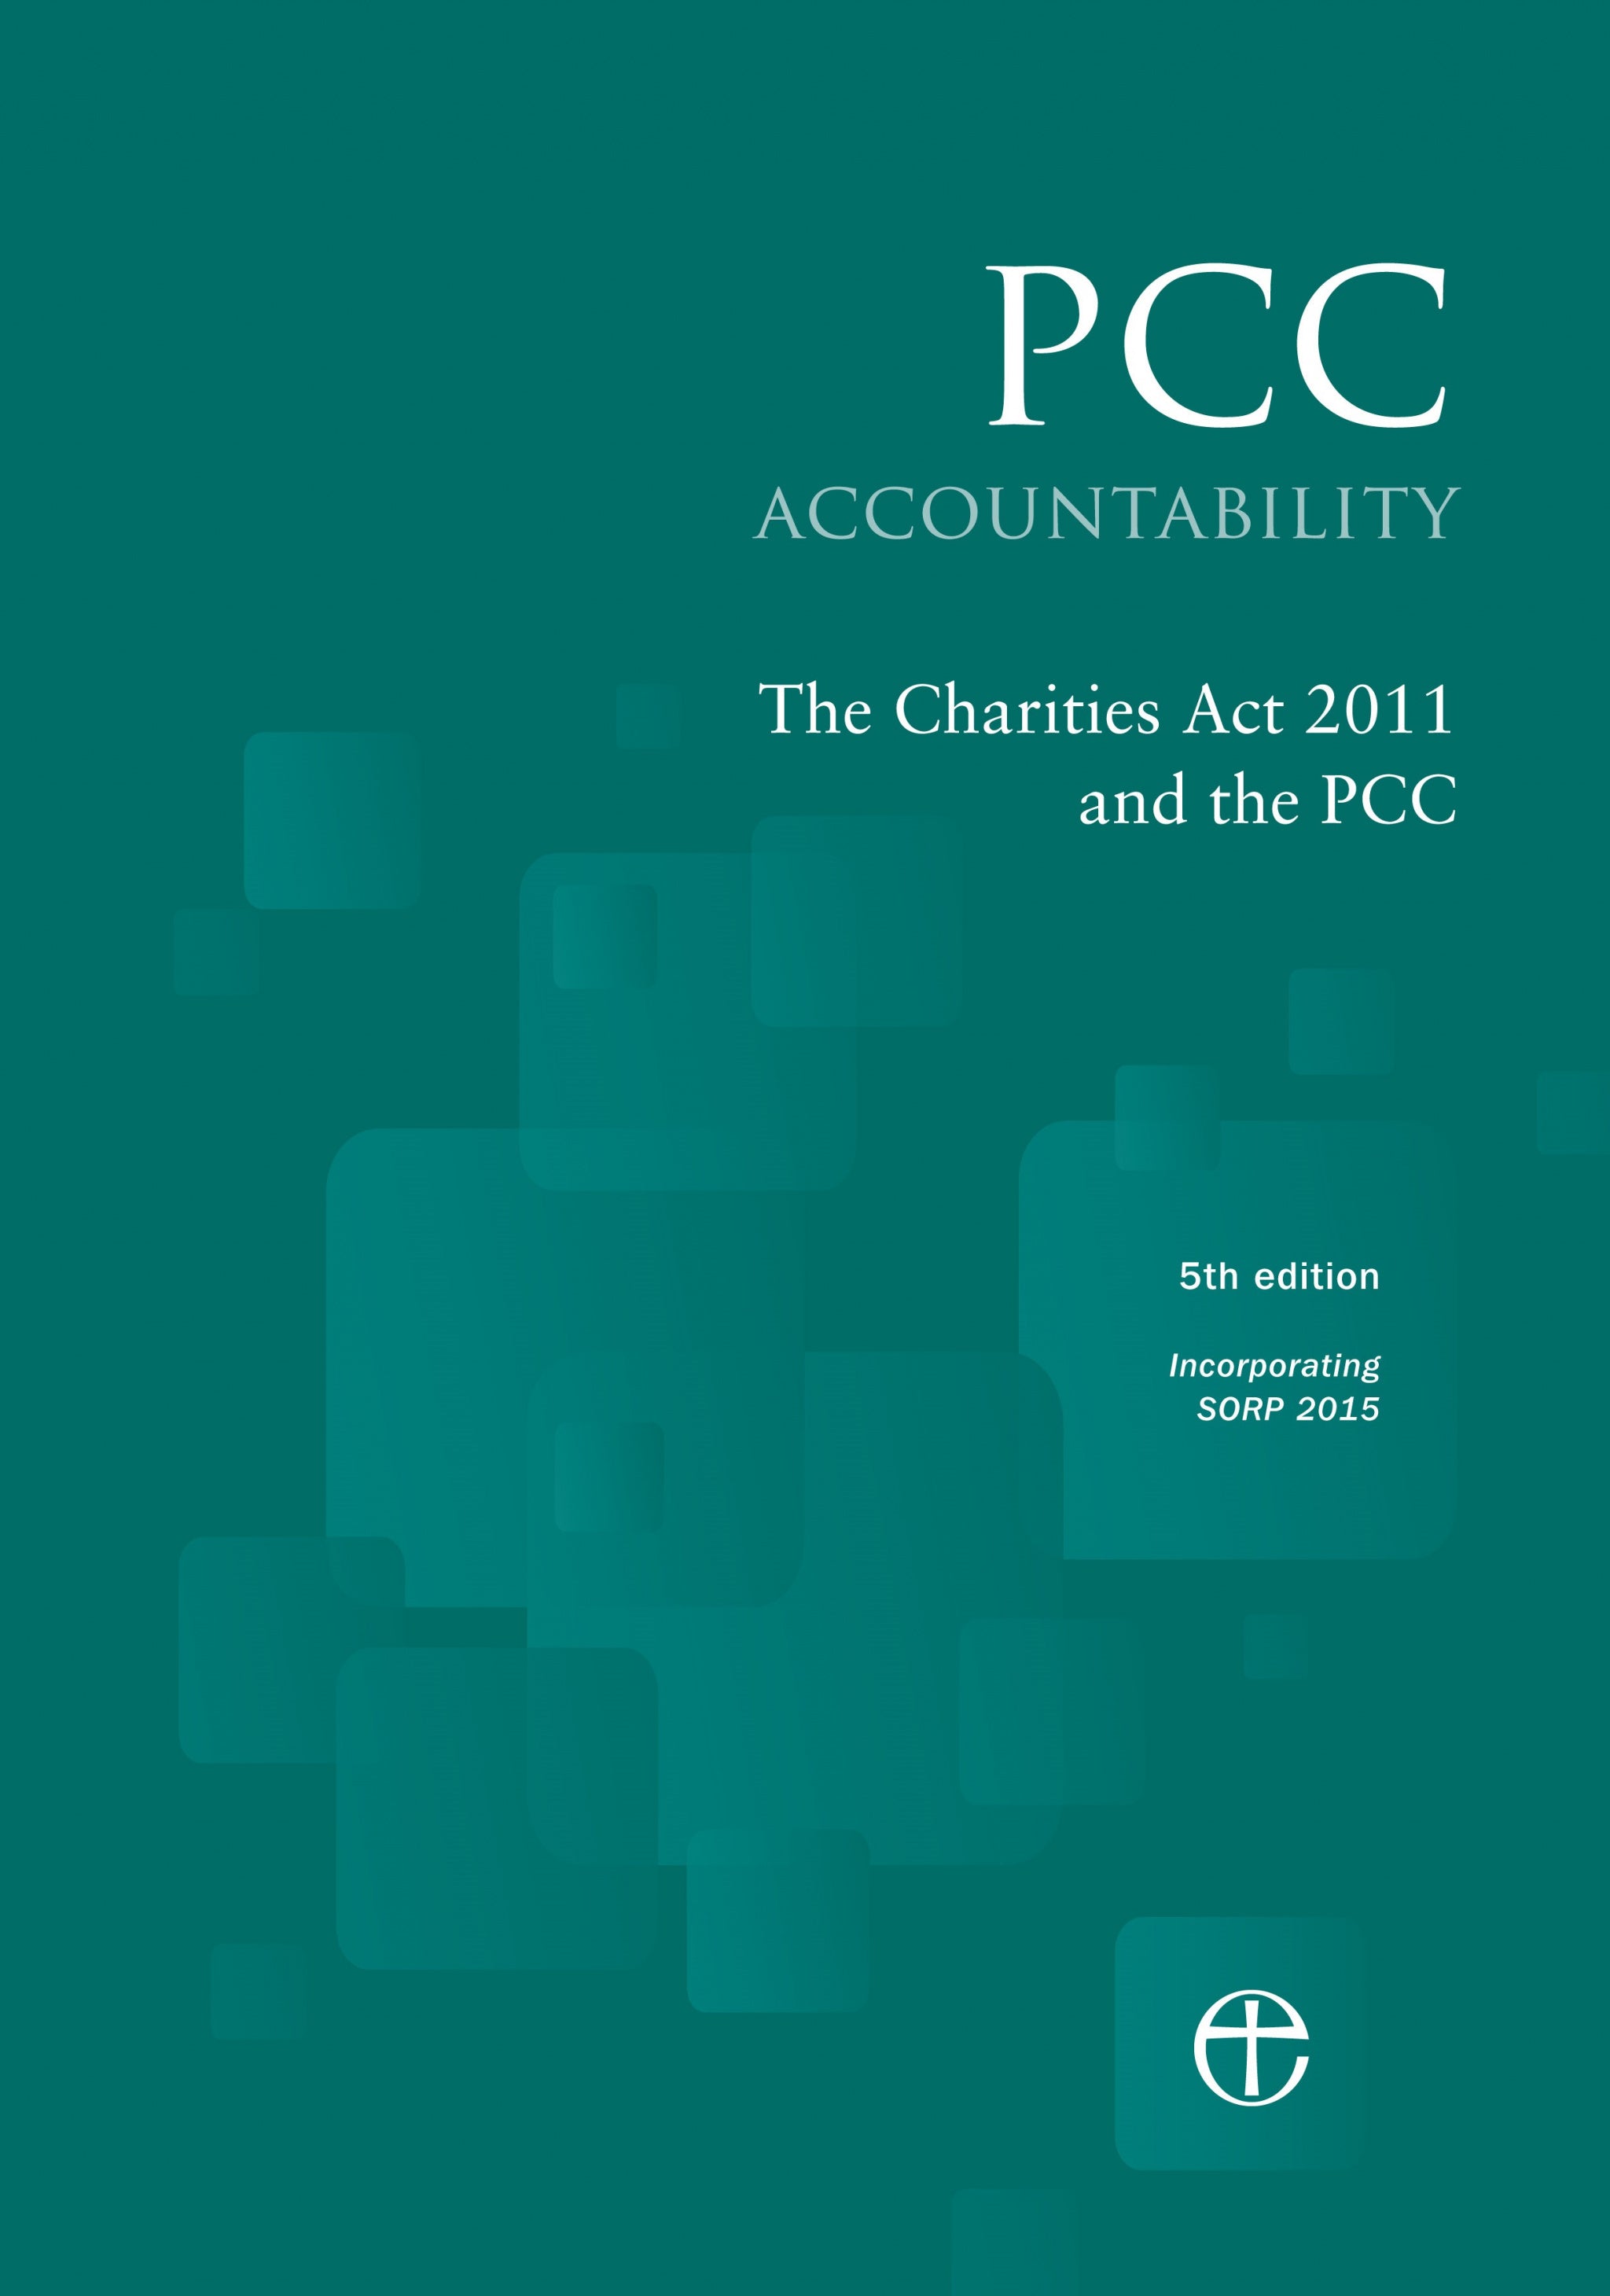 Image of PCC Accountability other